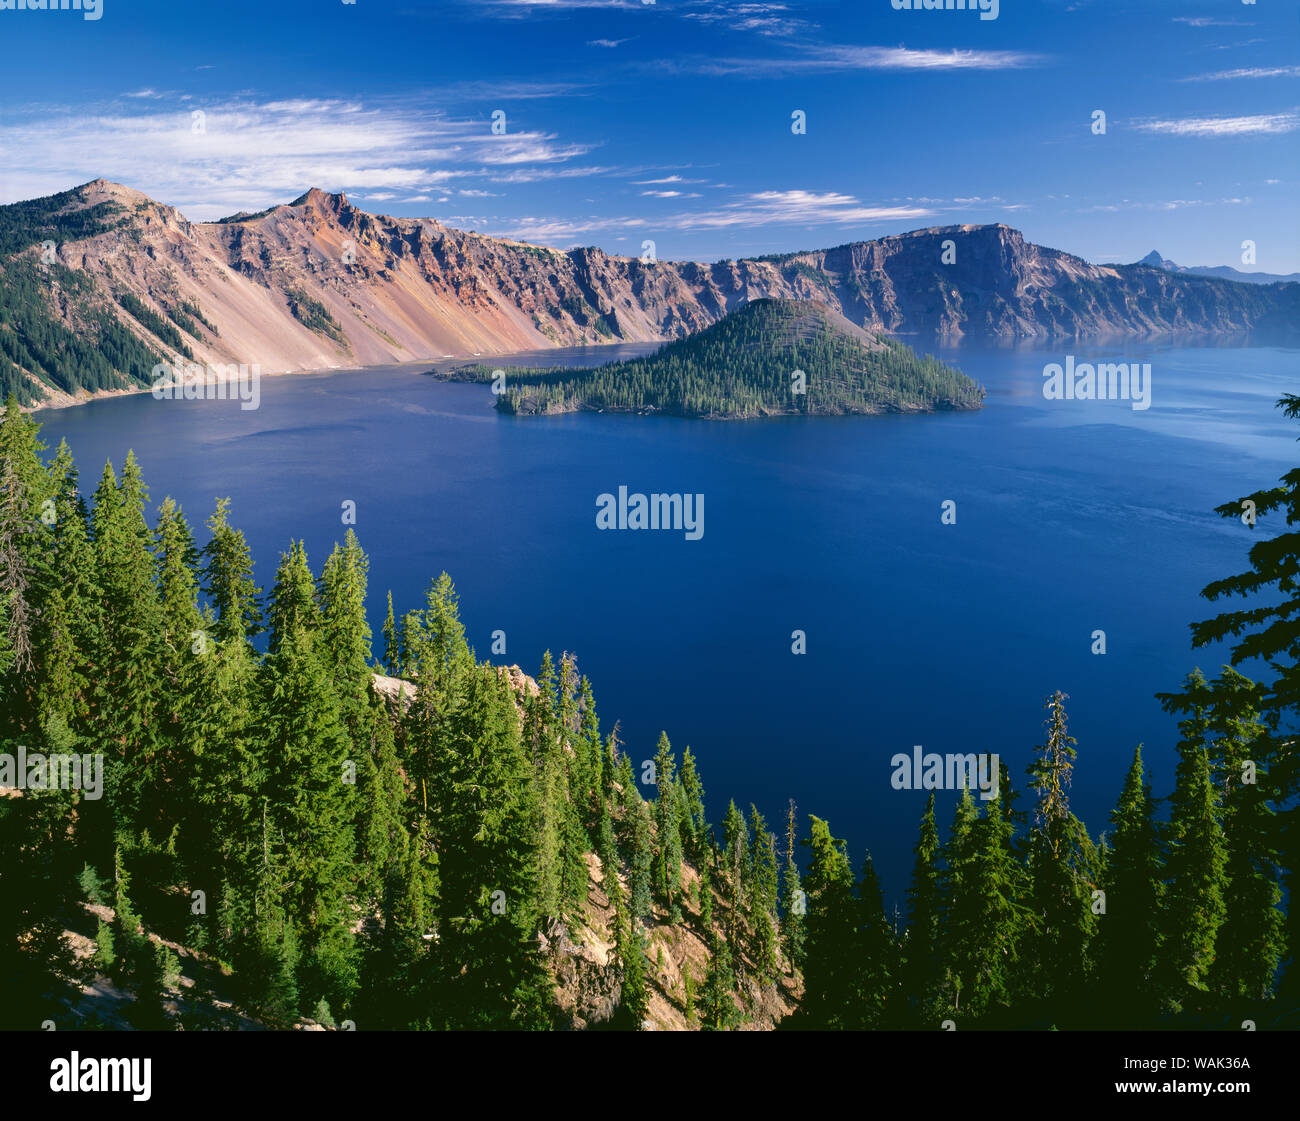 USA, Oregon, Crater Lake National Park. Crater Lake and Wizard Island with distant Hillman Peak (left), Llao Rock (right) and Mount Thielsen (far right). Stock Photo